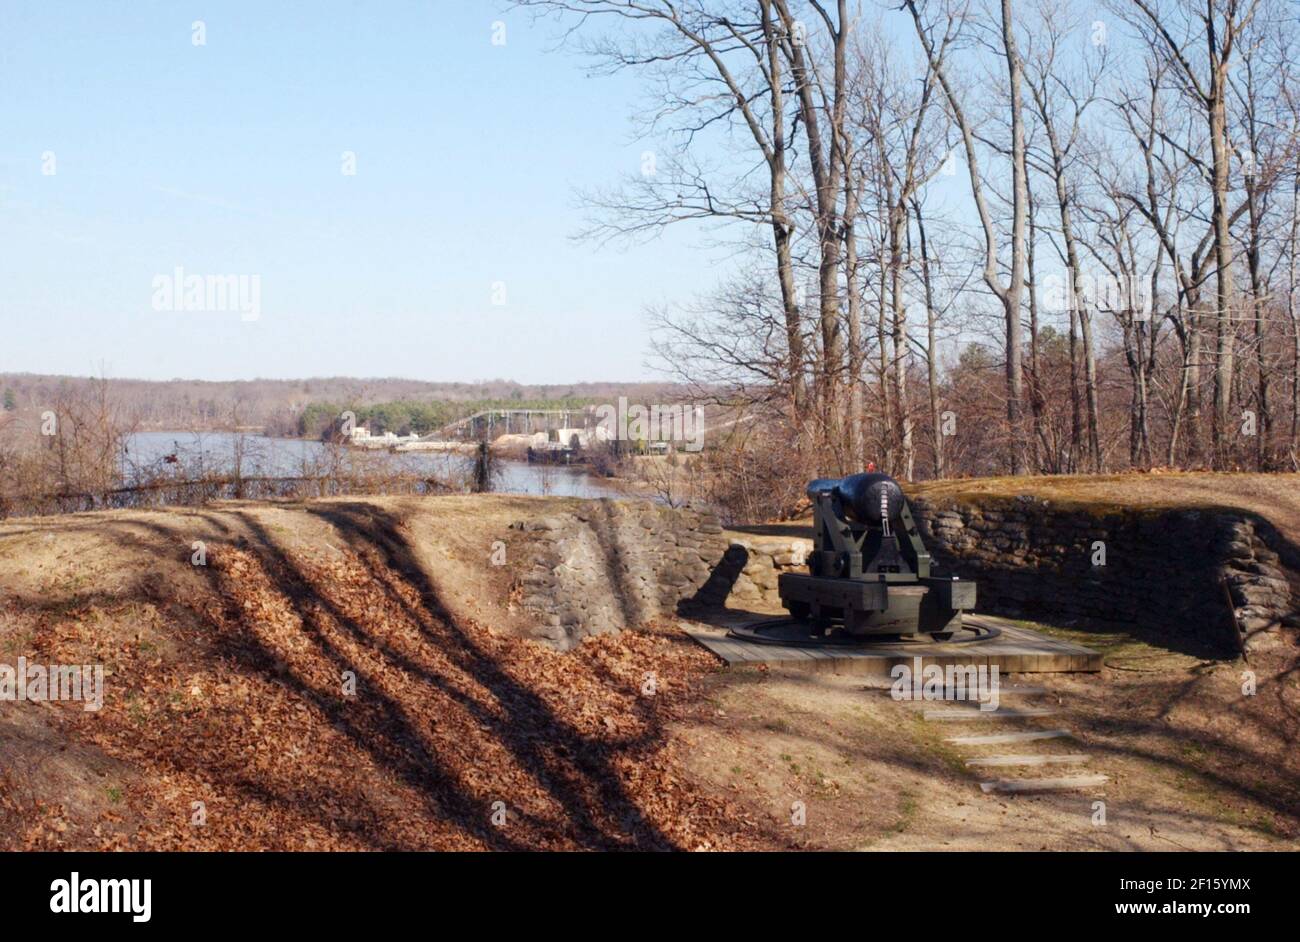 The James River appears over the ramparts of Fort Drewry, Virginia. Three large cannons, such as this 8-inch Columbia cannon, once sat inside the fort, guarding the James River approach to Richmond. During the American Civil War, a Confederate soldiers at the garrison successfully turned back a Union naval flotilla, which included the famous ironclad, USS Monitor, on May 15, 1862. (Photo by Chuck Myers/MCT/Sipa USA) Stock Photo